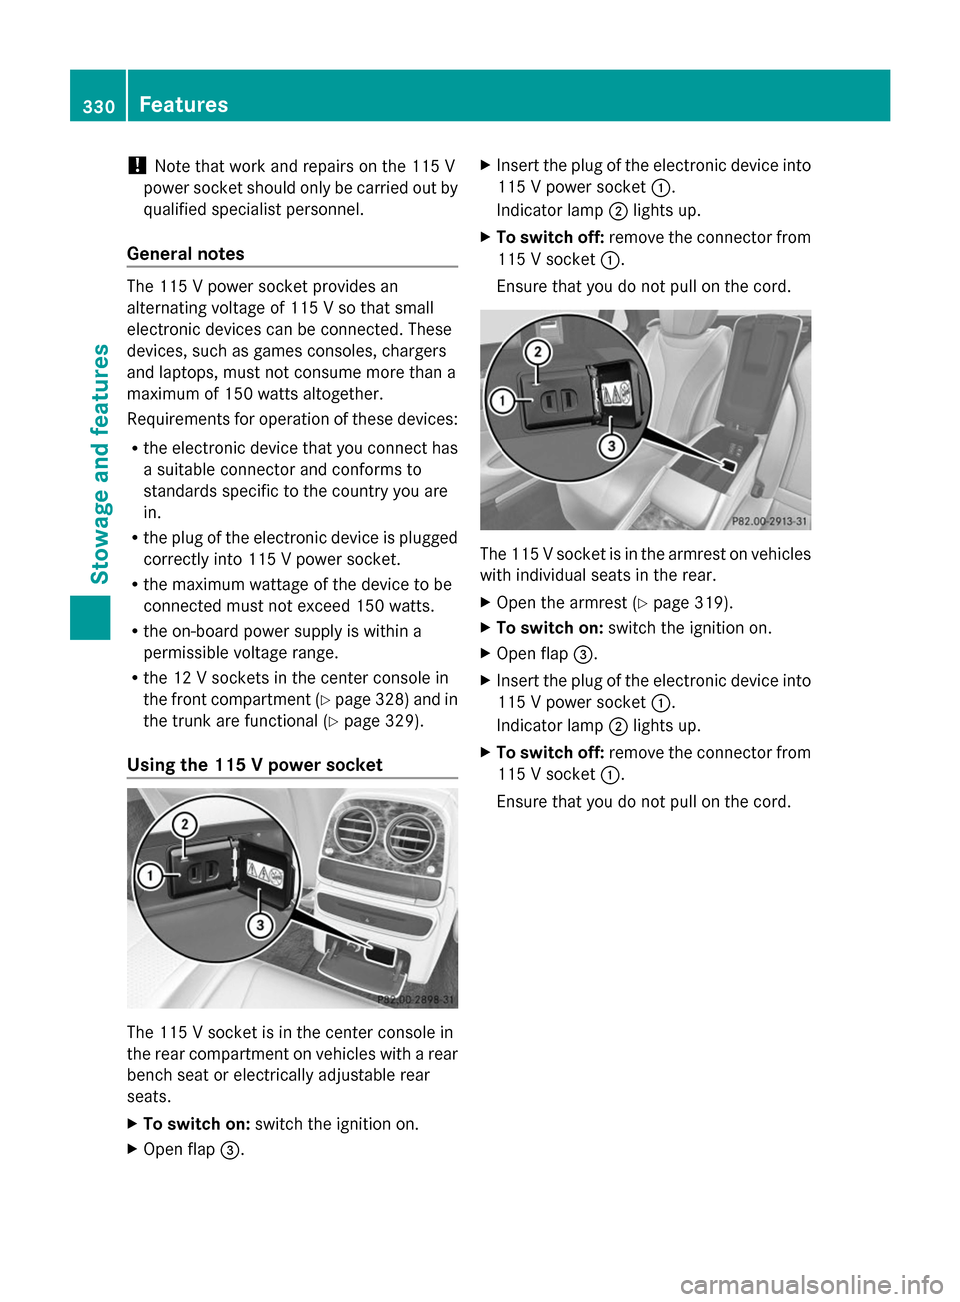 MERCEDES-BENZ S-Class 2014 W222 Manual PDF !
Note that work and repairs on the 115 V
power socket should only be carried out by
qualified specialist personnel.
General notes The 115 V power socket provides an
alternating voltage of 115 V so th